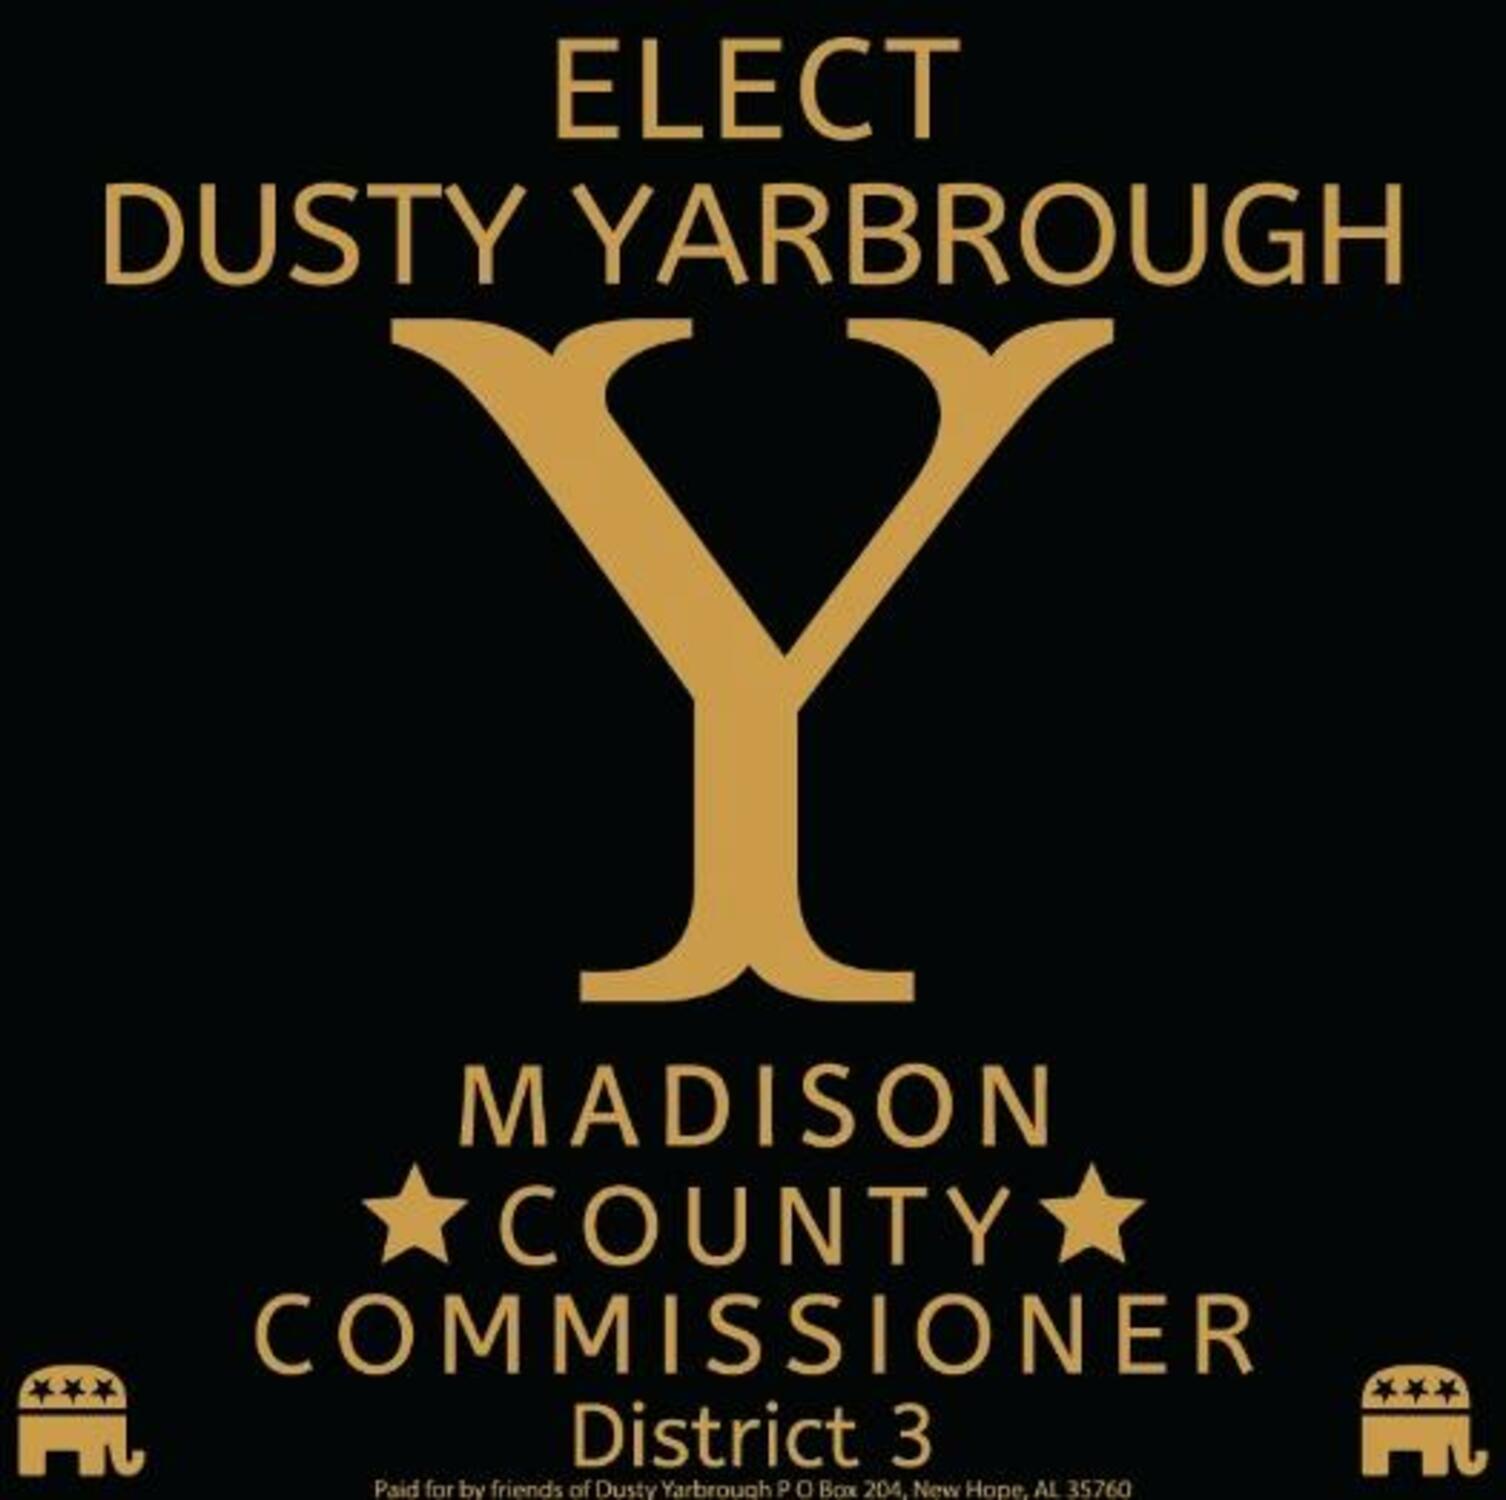 Elect Dusty Yarbrough Madison County Commissioner District 3